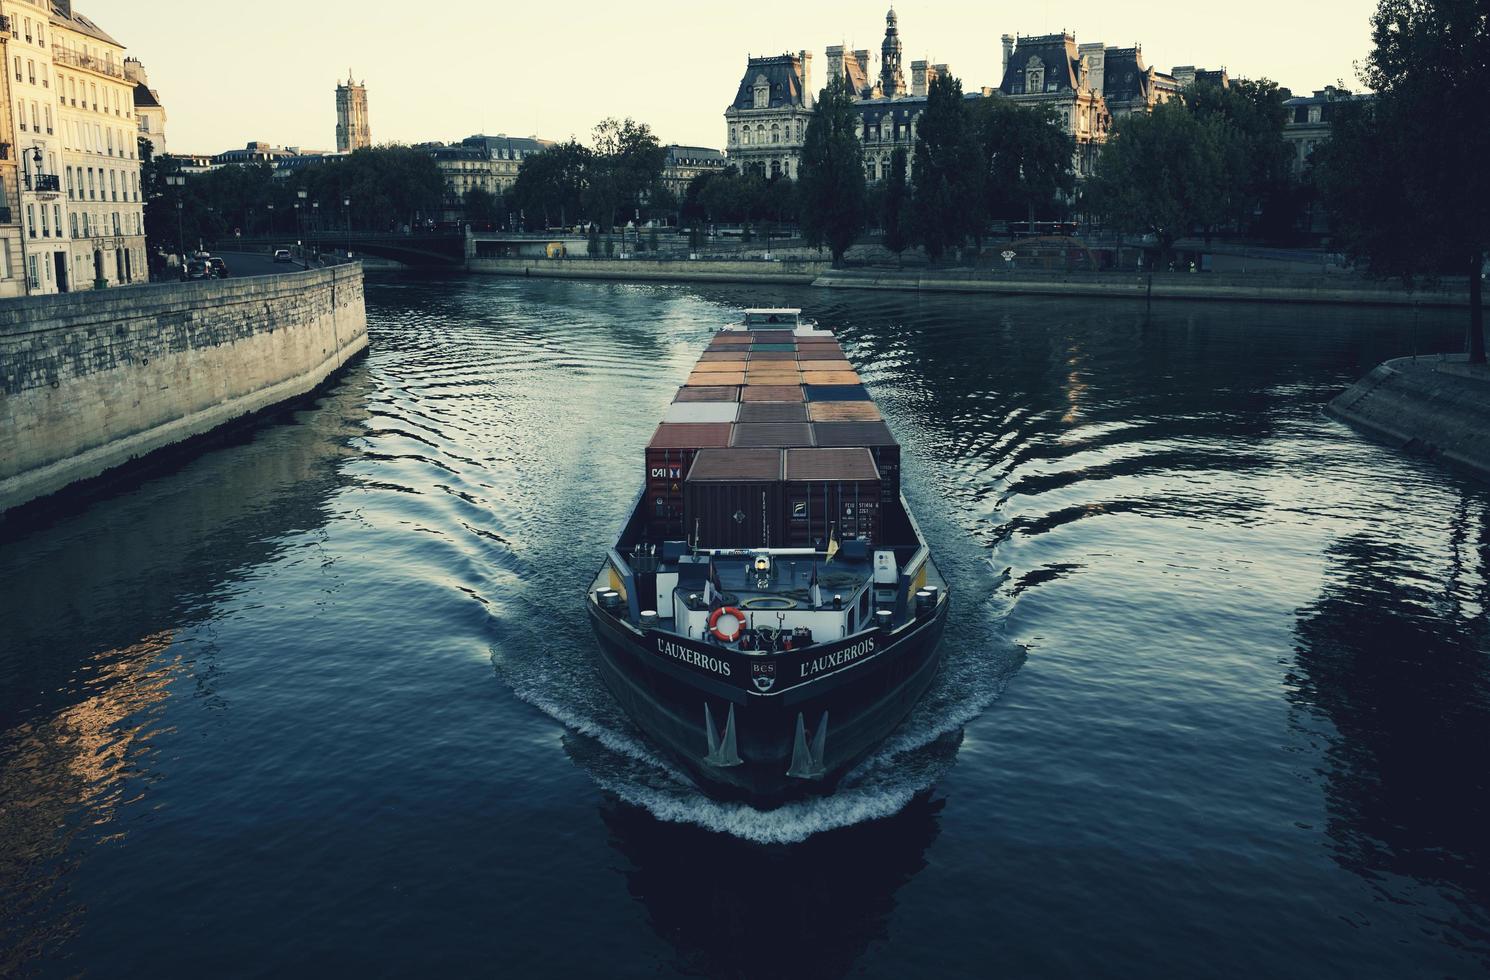 Paris, France, 2020 - Boat on a body of water photo